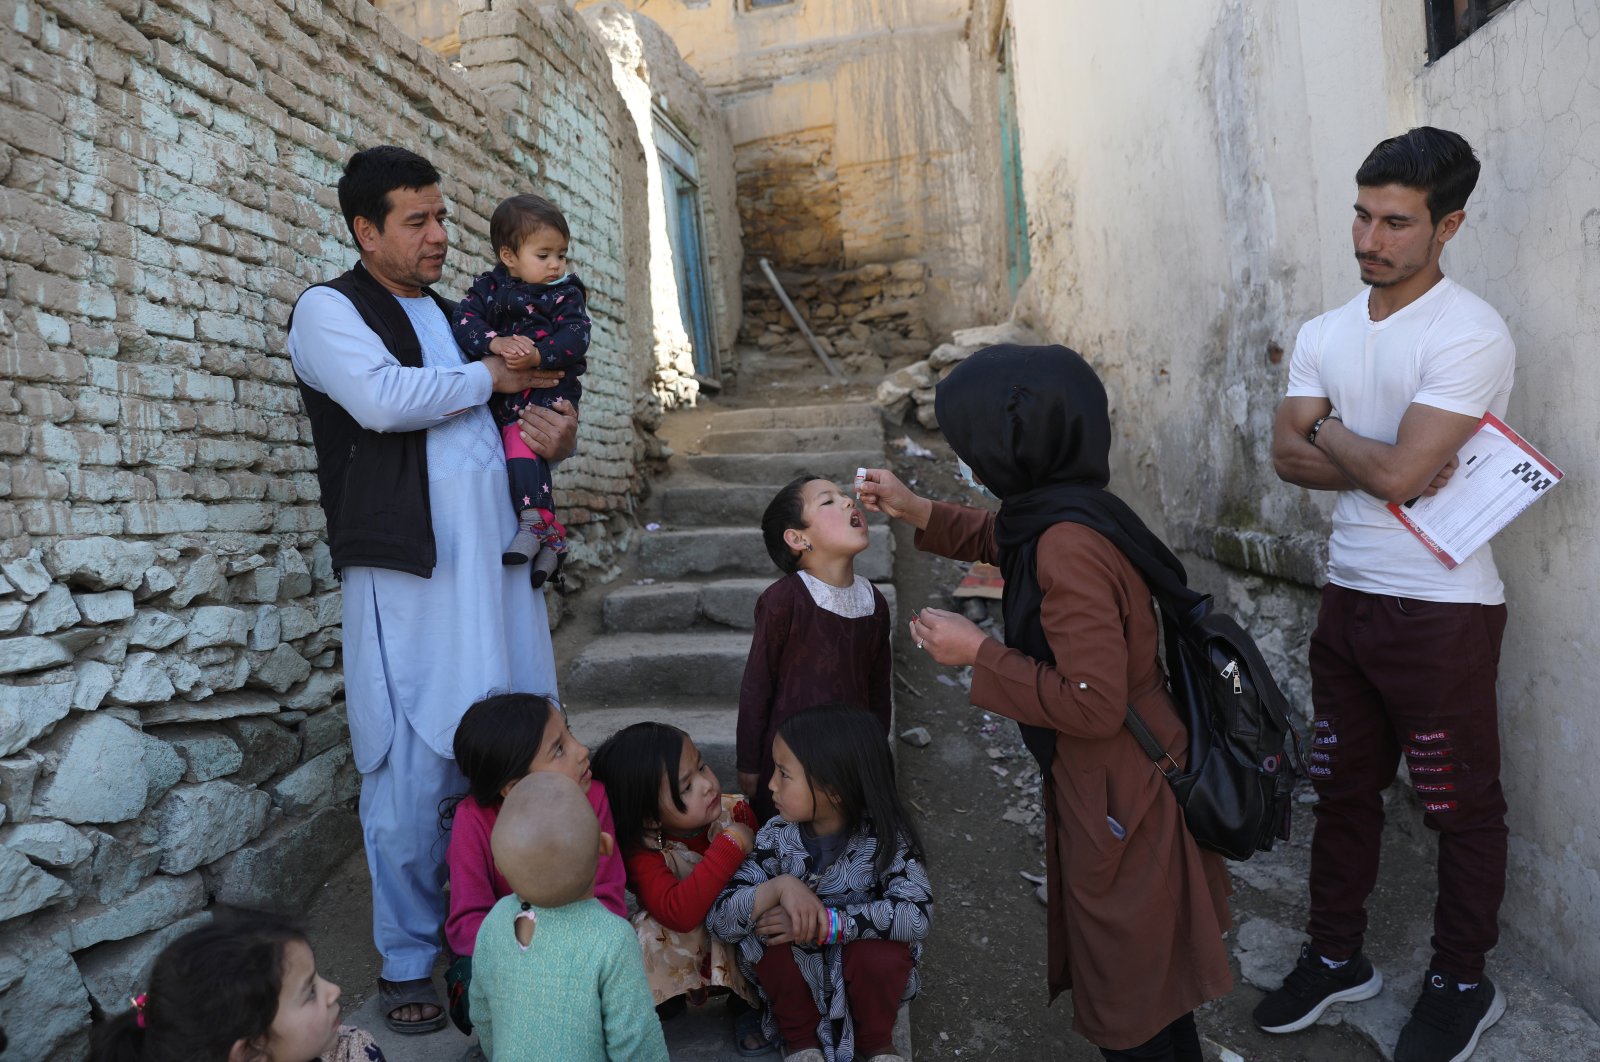 Shabana Maani administers a polio vaccine to a child in the old city of Kabul, Afghanistan, March 29, 2021. (AP Photo)